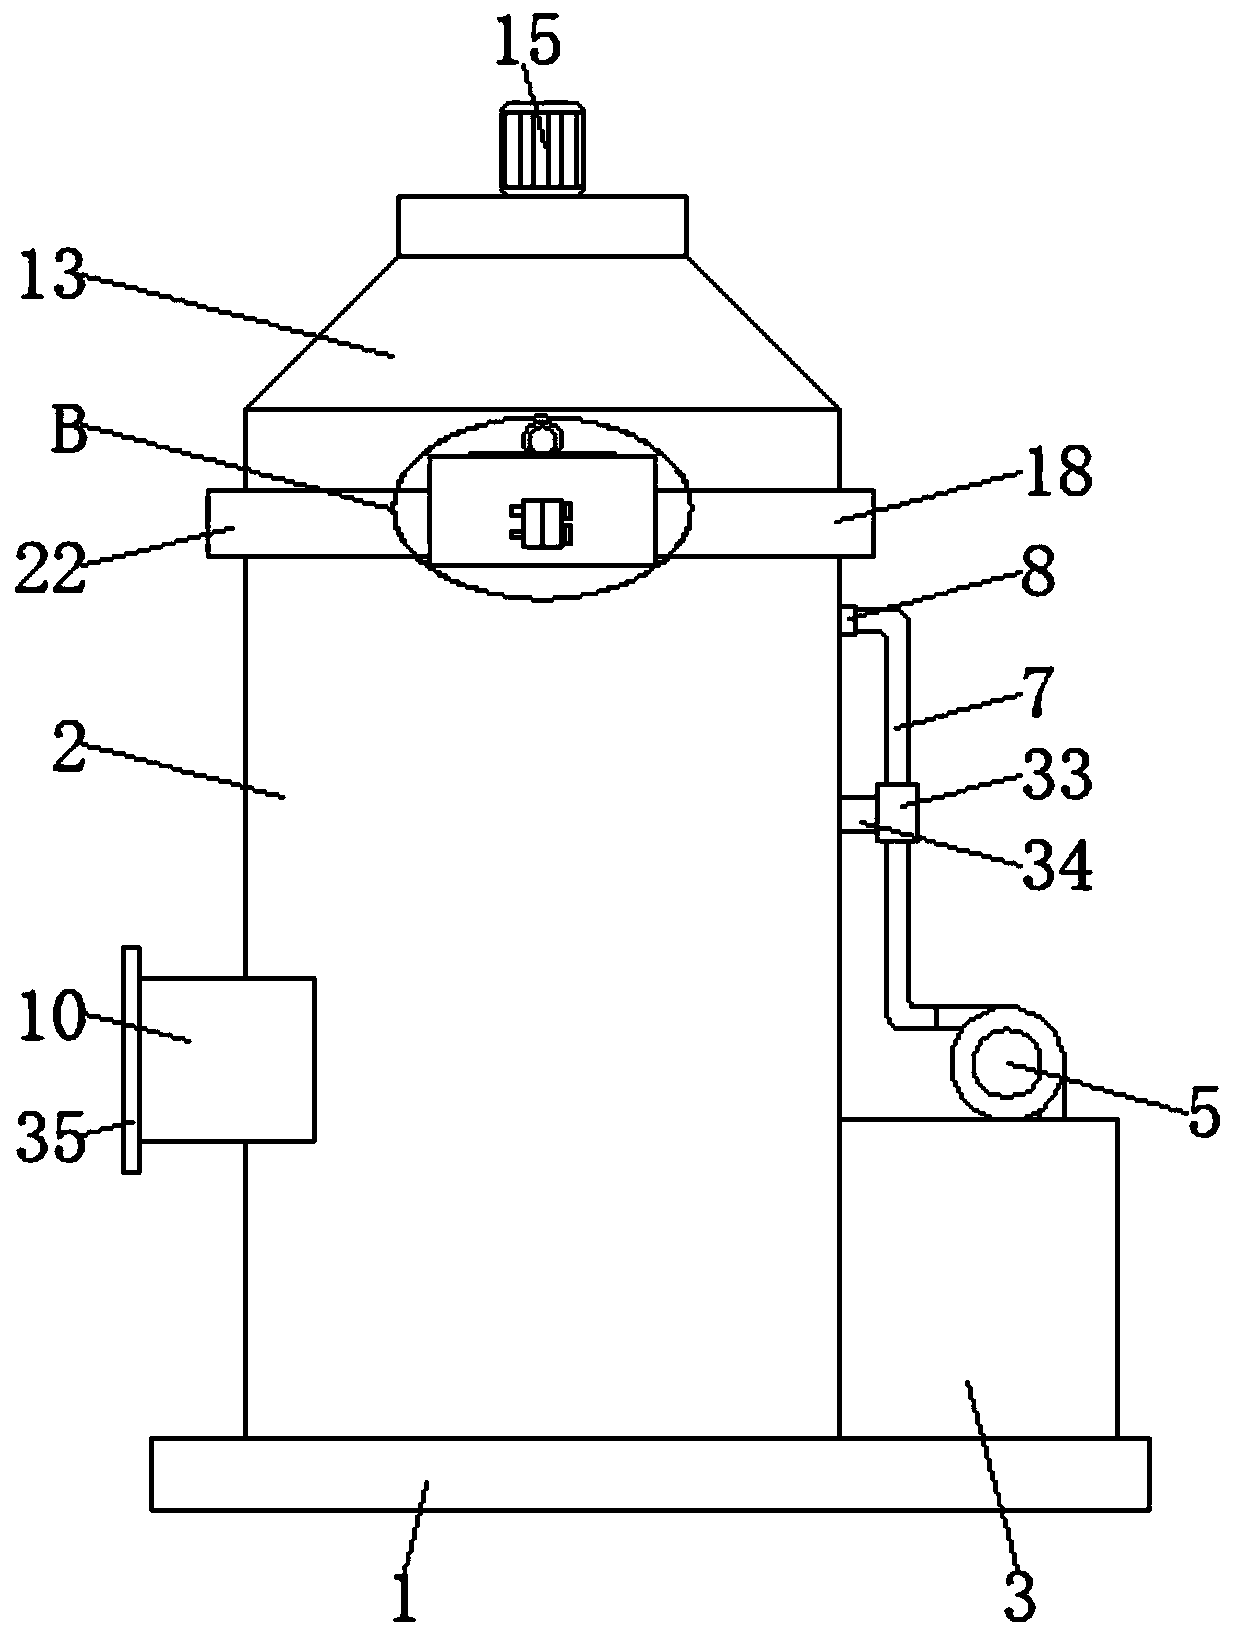 Dust treatment device for wood processing workshop